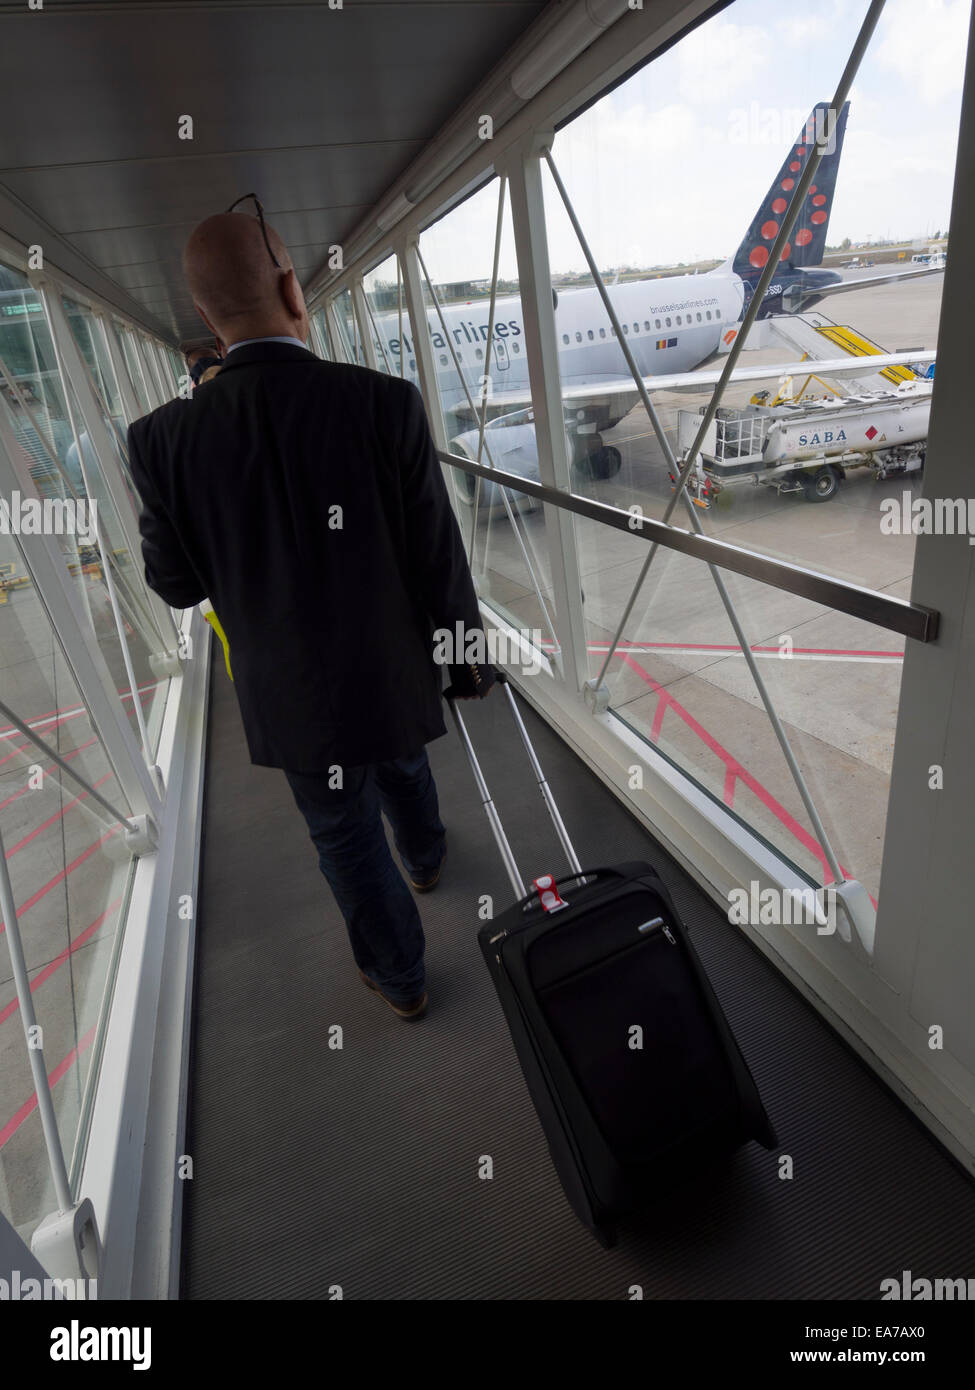 Passenger with suitcase boarding a Brussels Airlines Airbus A319-112 airplane Stock Photo